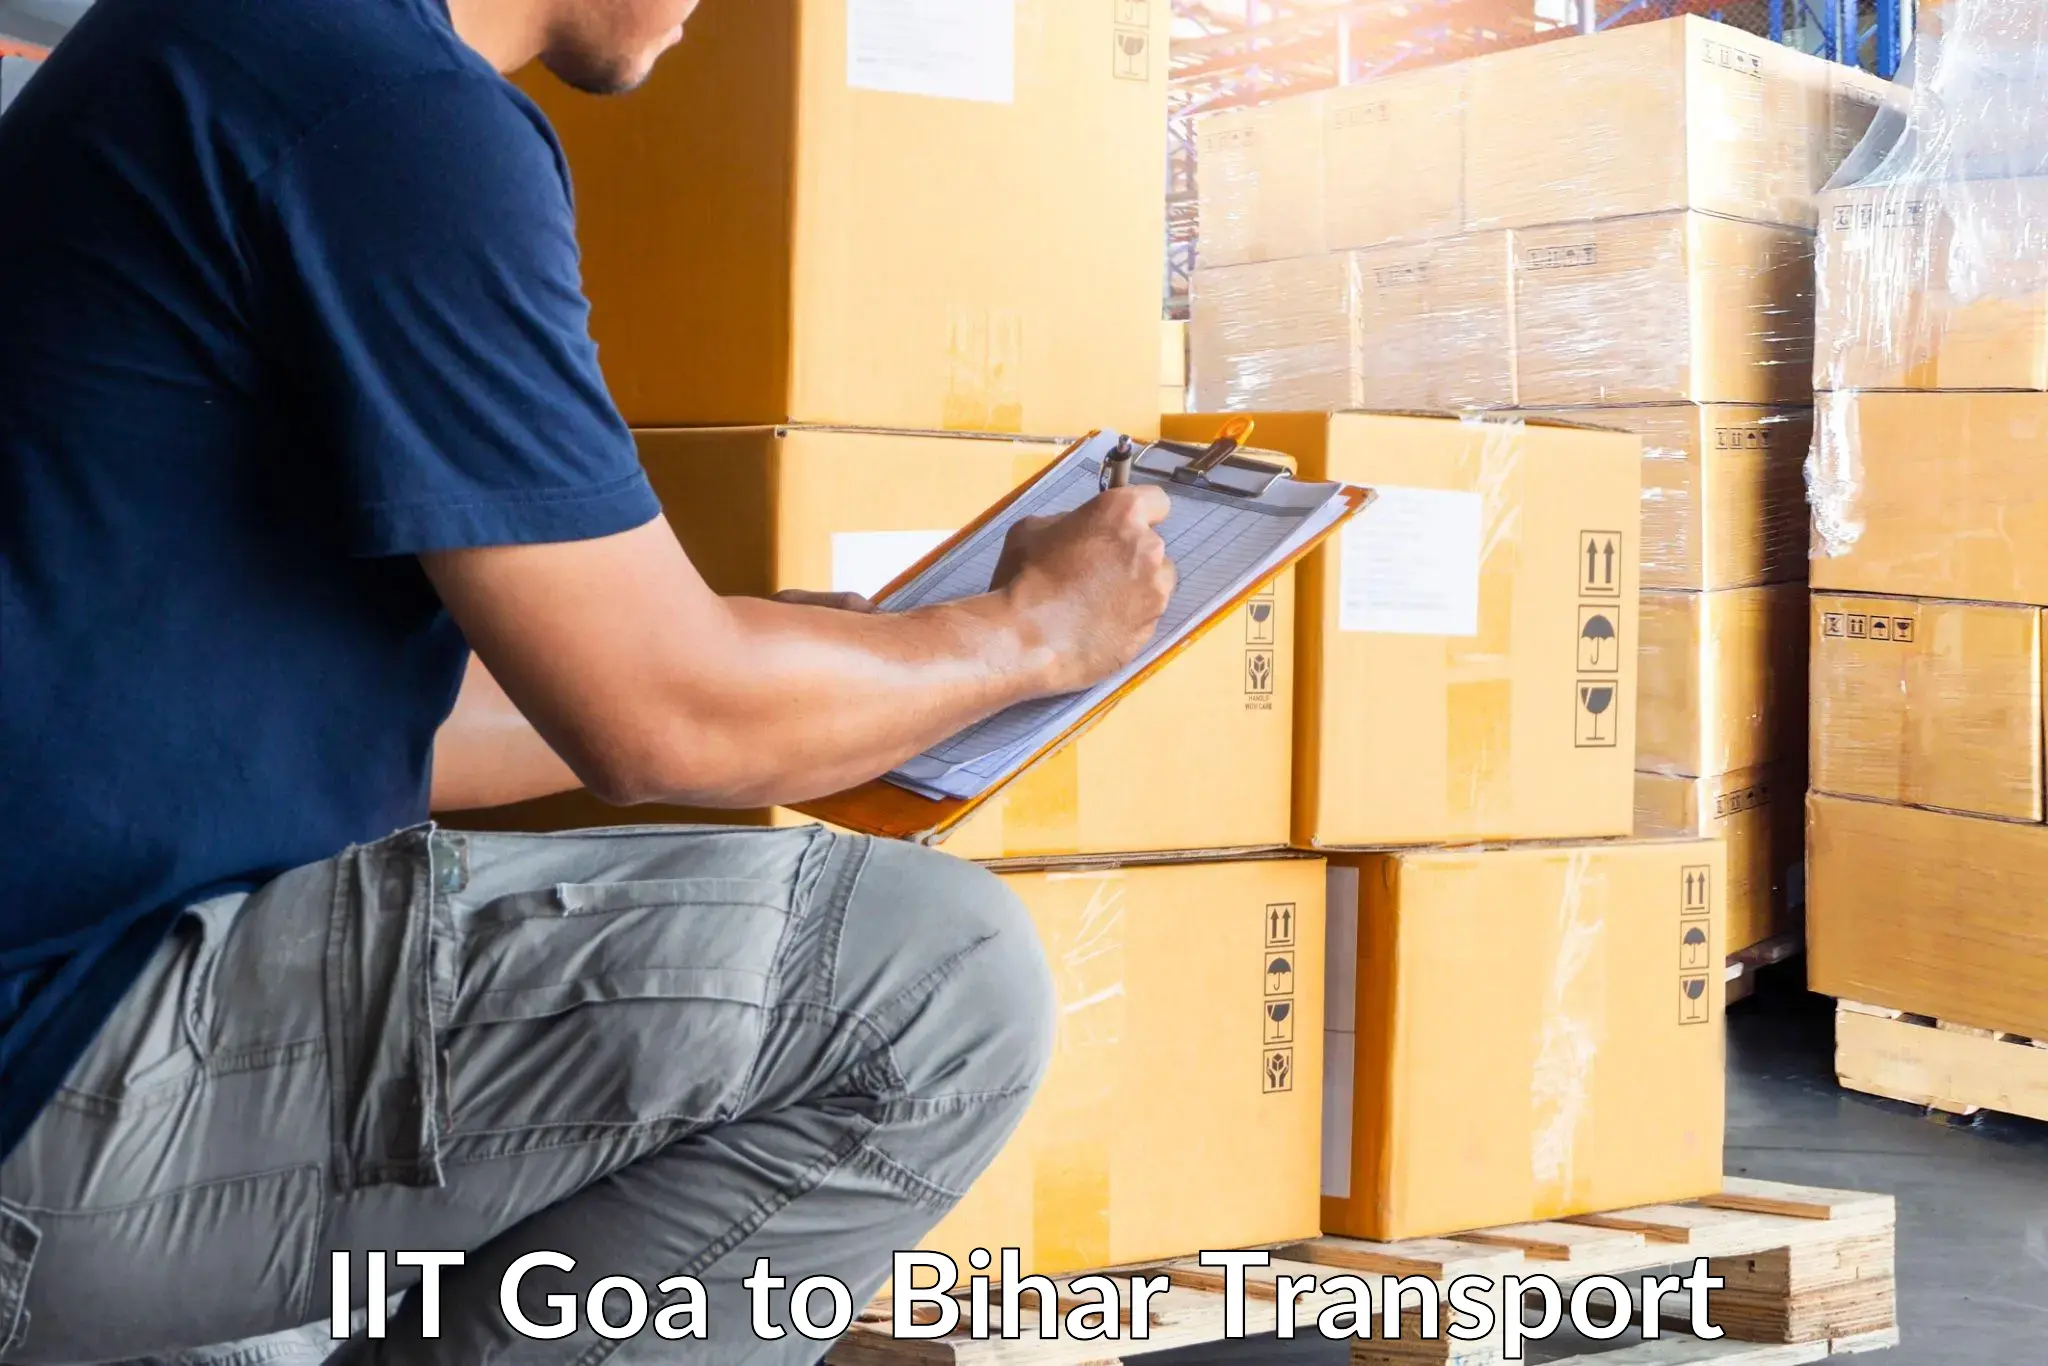 Daily parcel service transport IIT Goa to Kamtaul